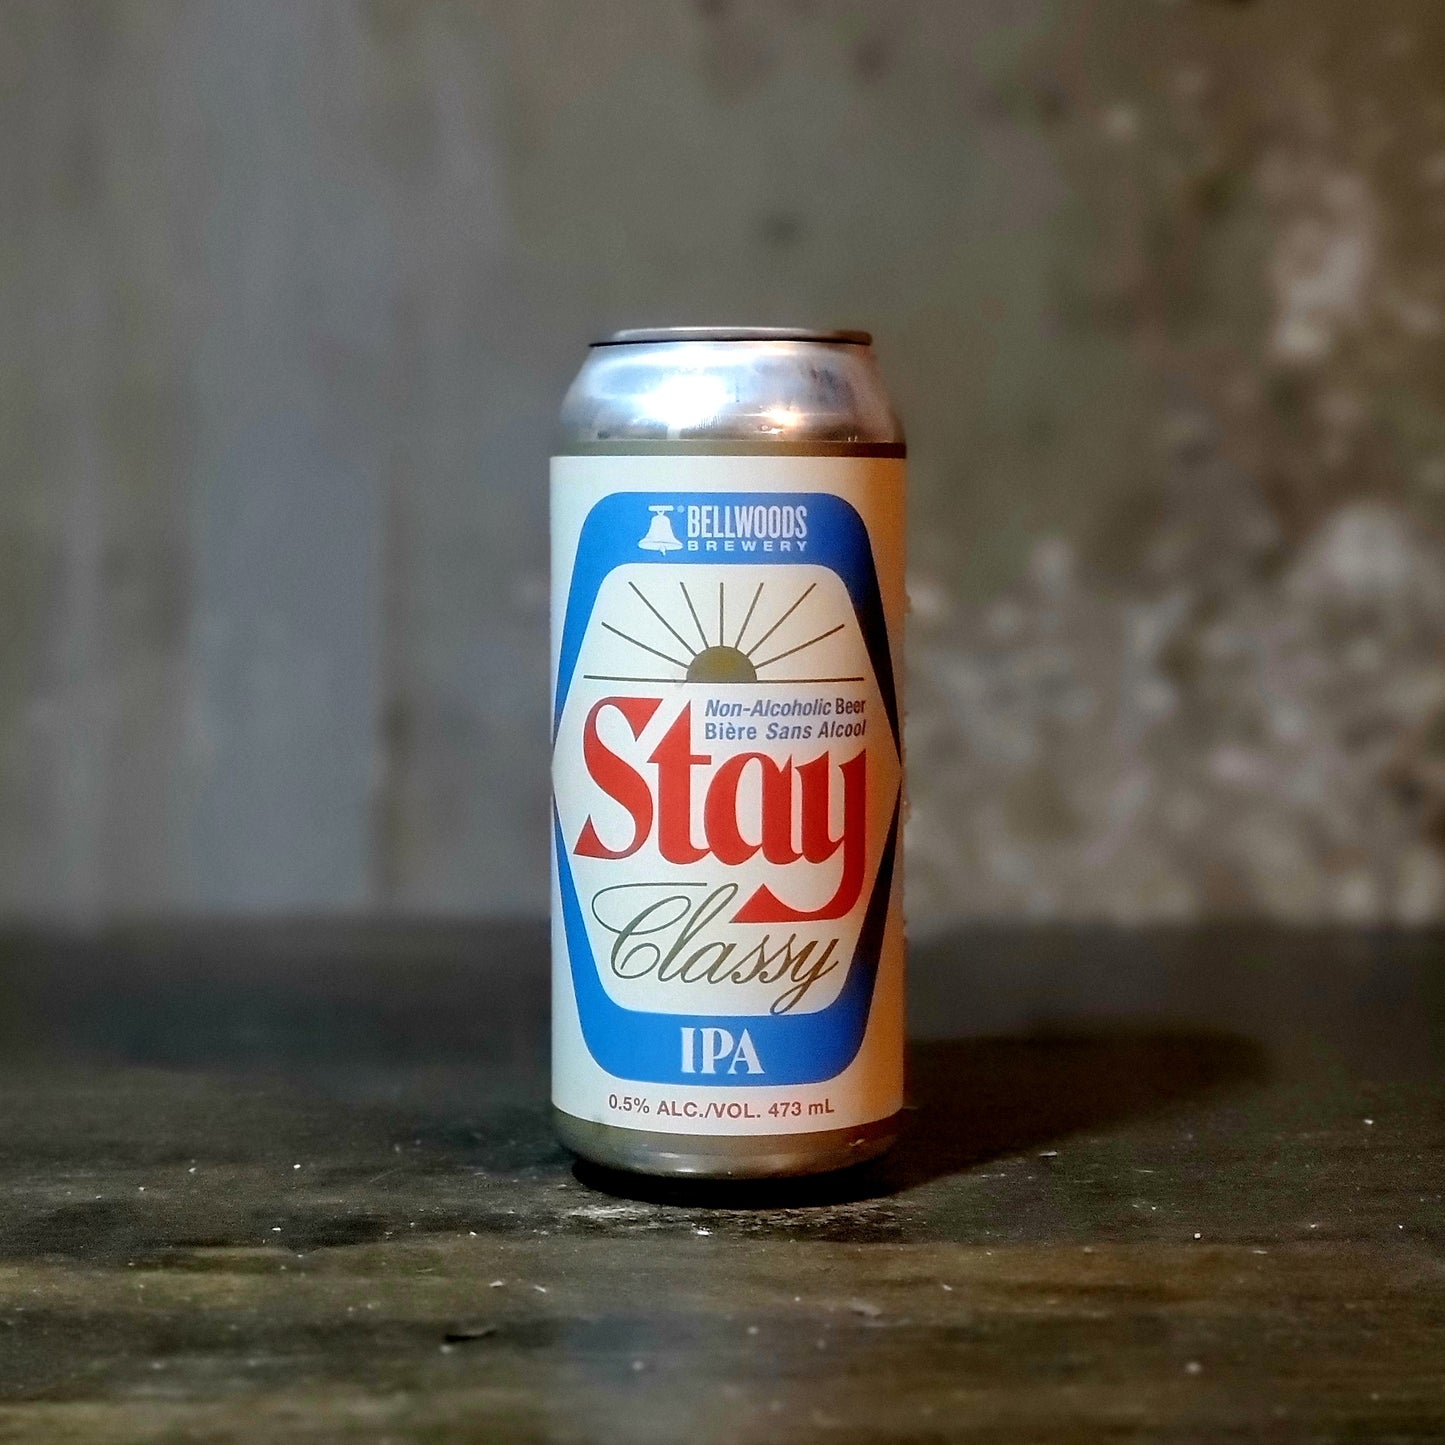 Bellwoods "Stay Classy" Non-Alcoholic IPA